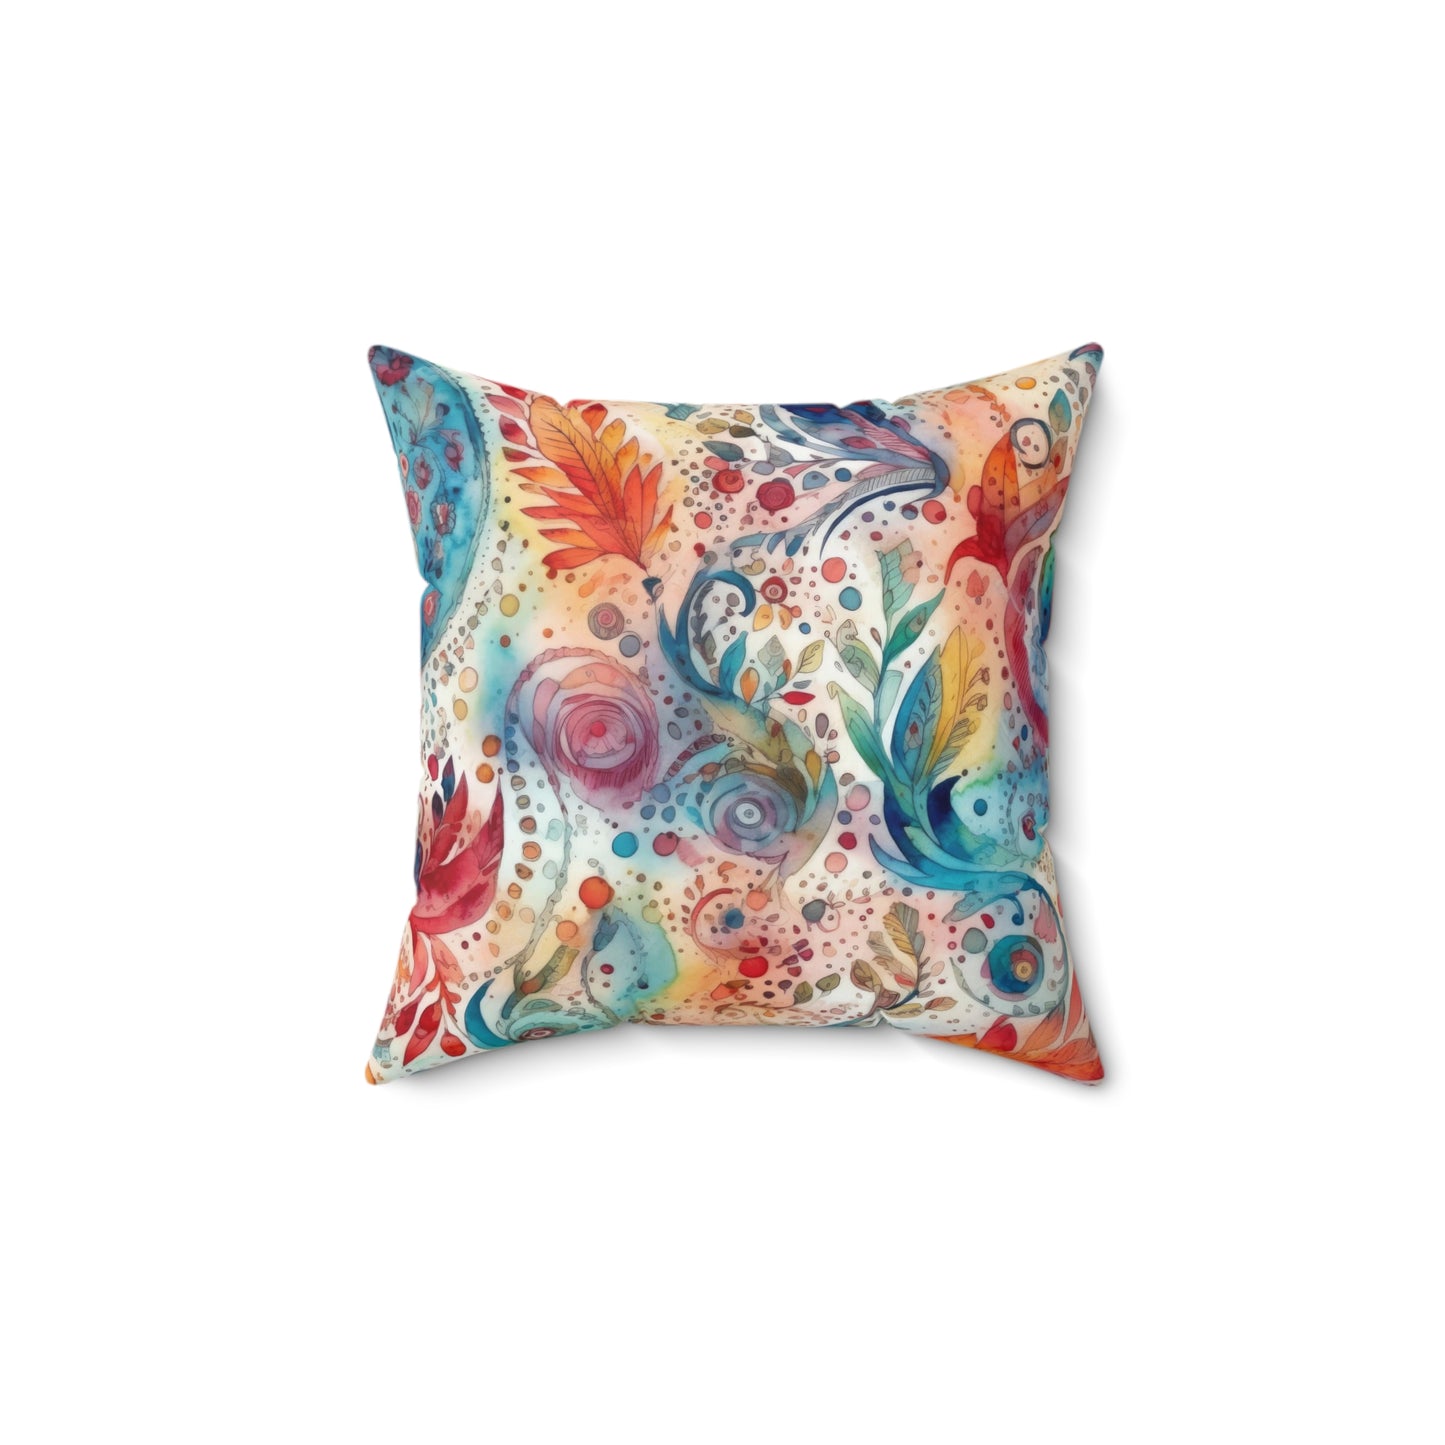 Watercolor Multicolor Paisleys 4 - Beautiful, Shabby Chic, Boho, Fun - Faux Suede Square Pillow